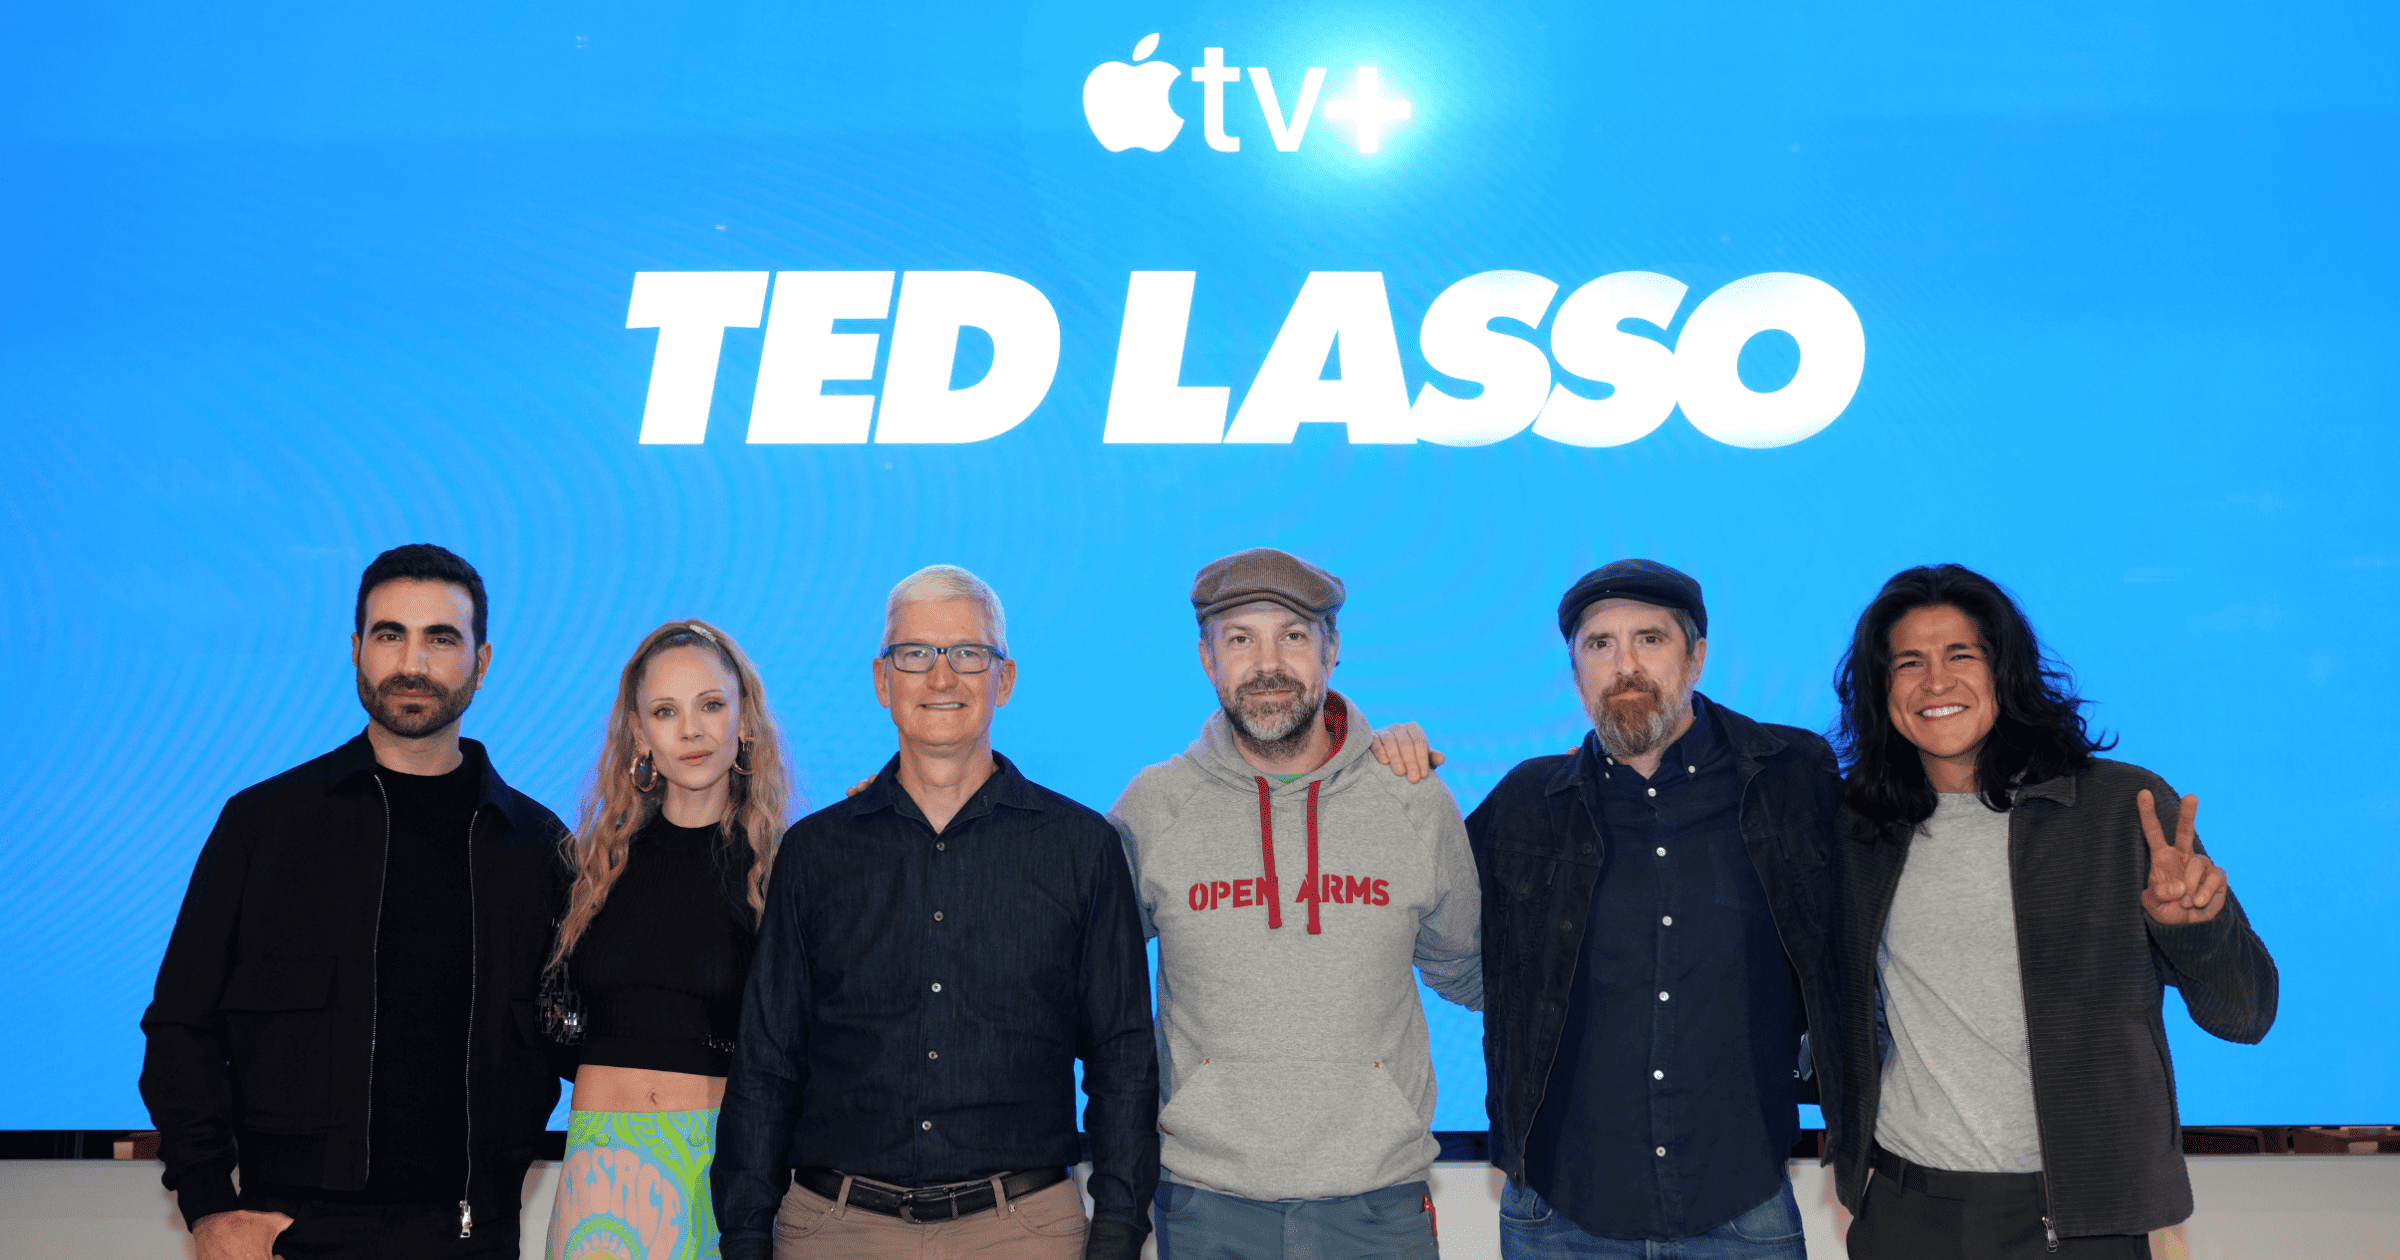 Ted Lasso stars at Apple The Grove with Tim Cook